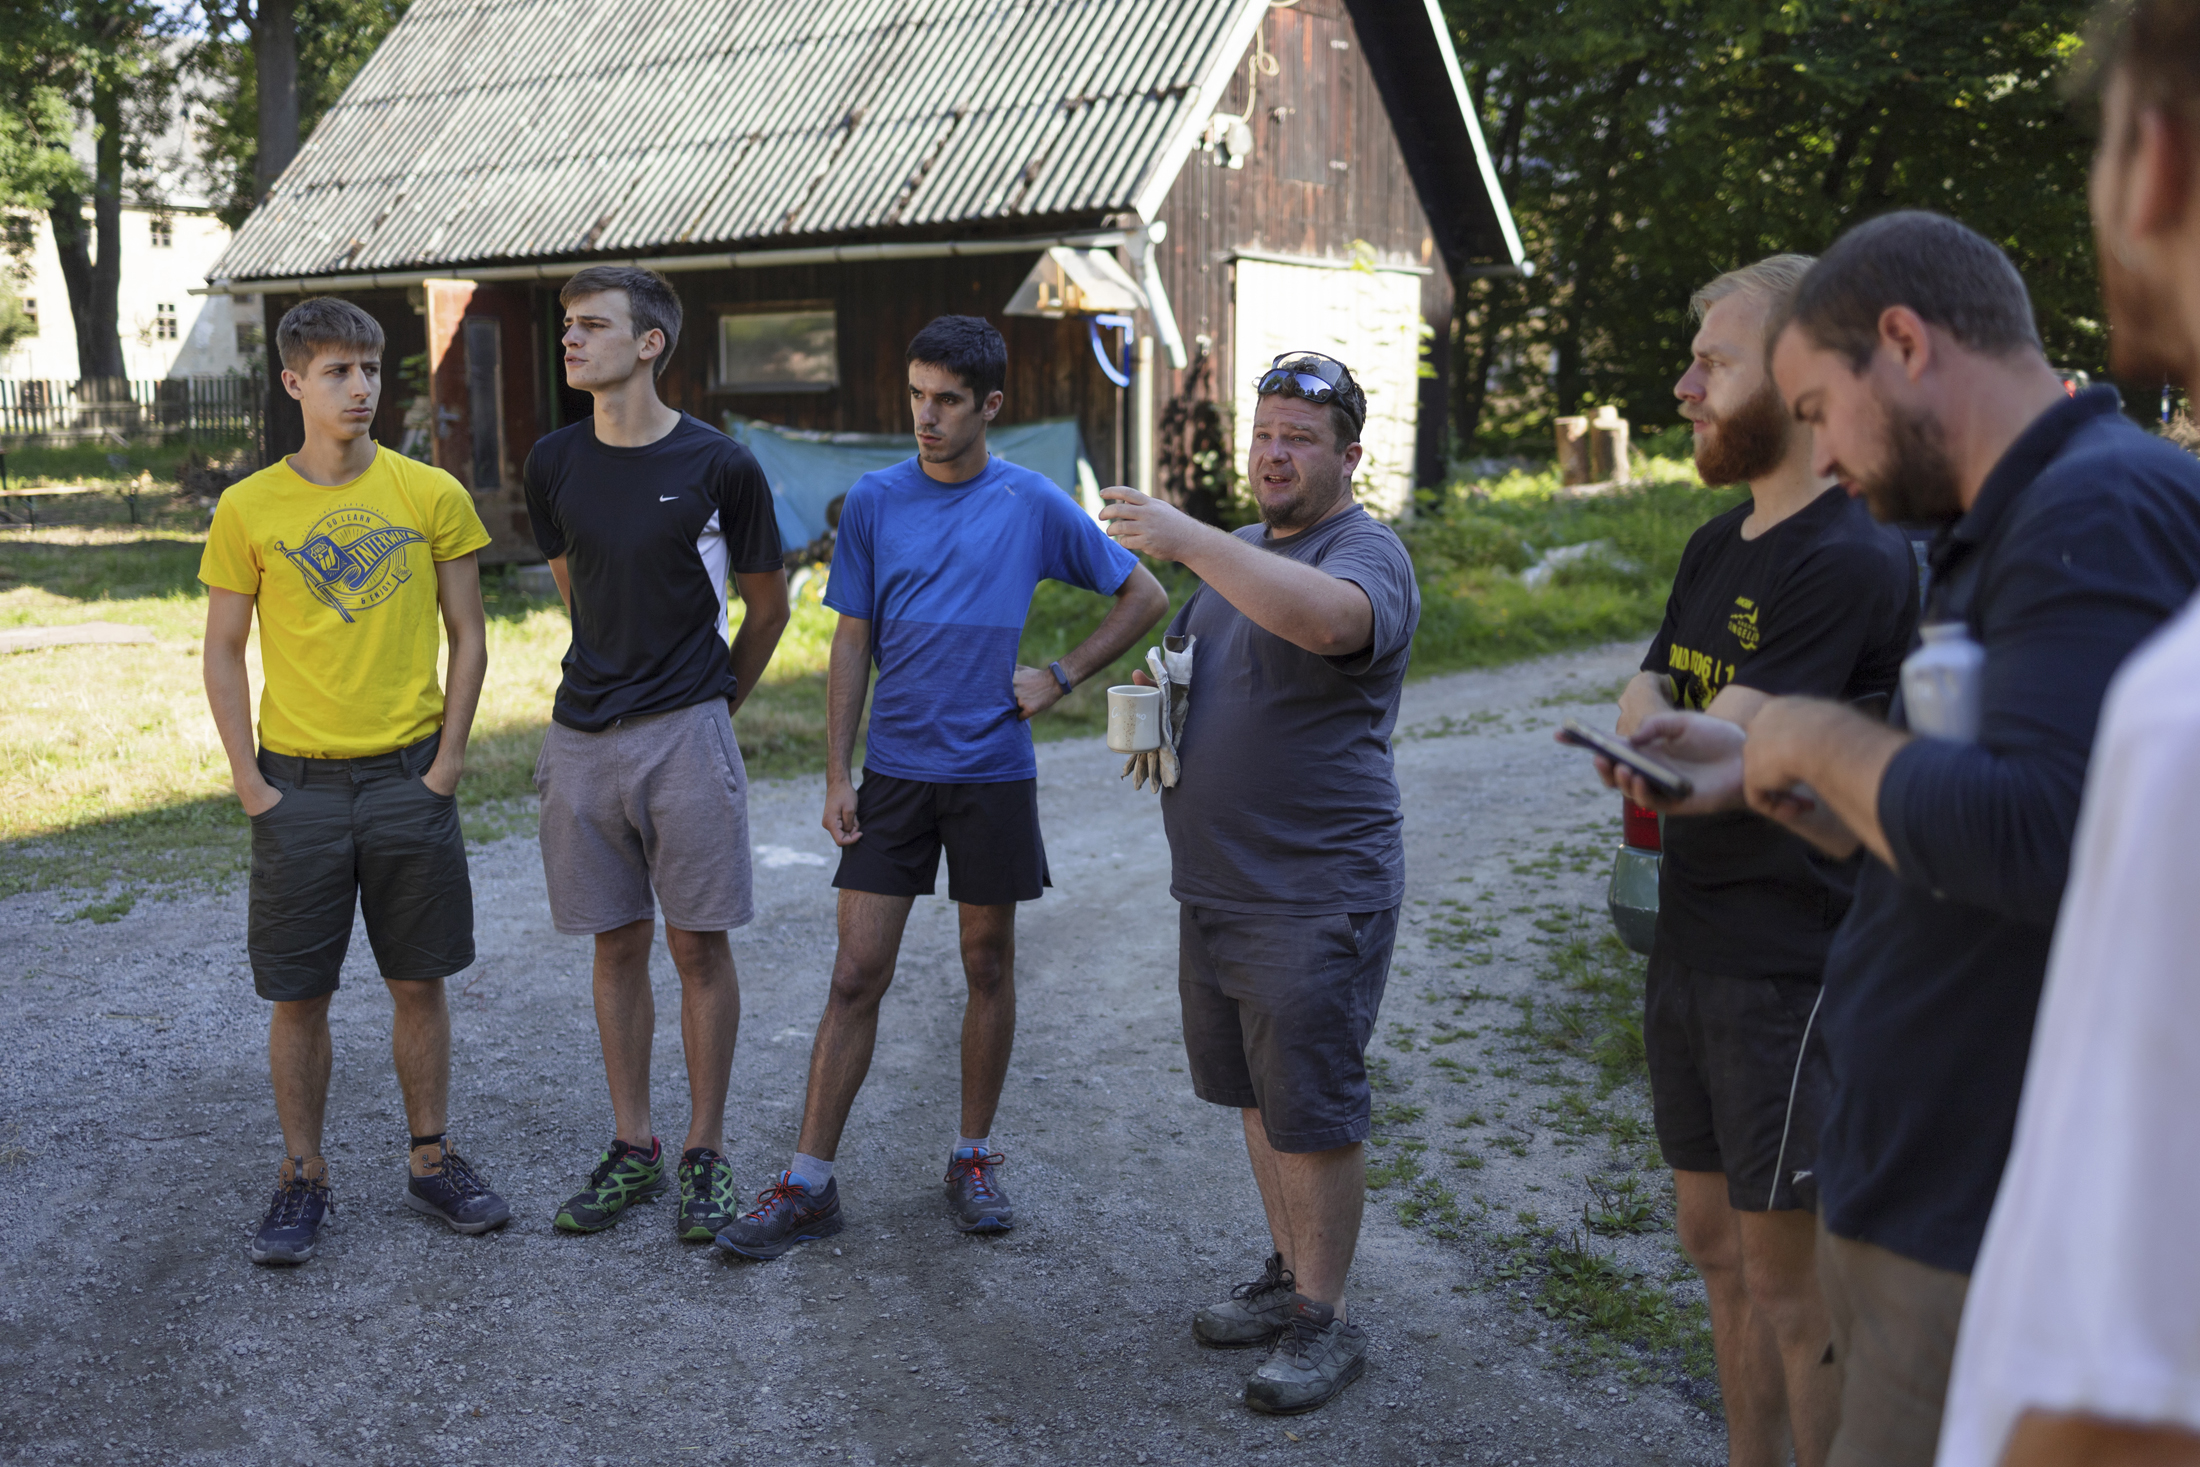 Briefing, Jakub Kříž, head of the Association for the Renovation of the Brewery in Janovice, is giving instructions to volunteers in the morning, Janovice, Rýmařov, Czech Republic